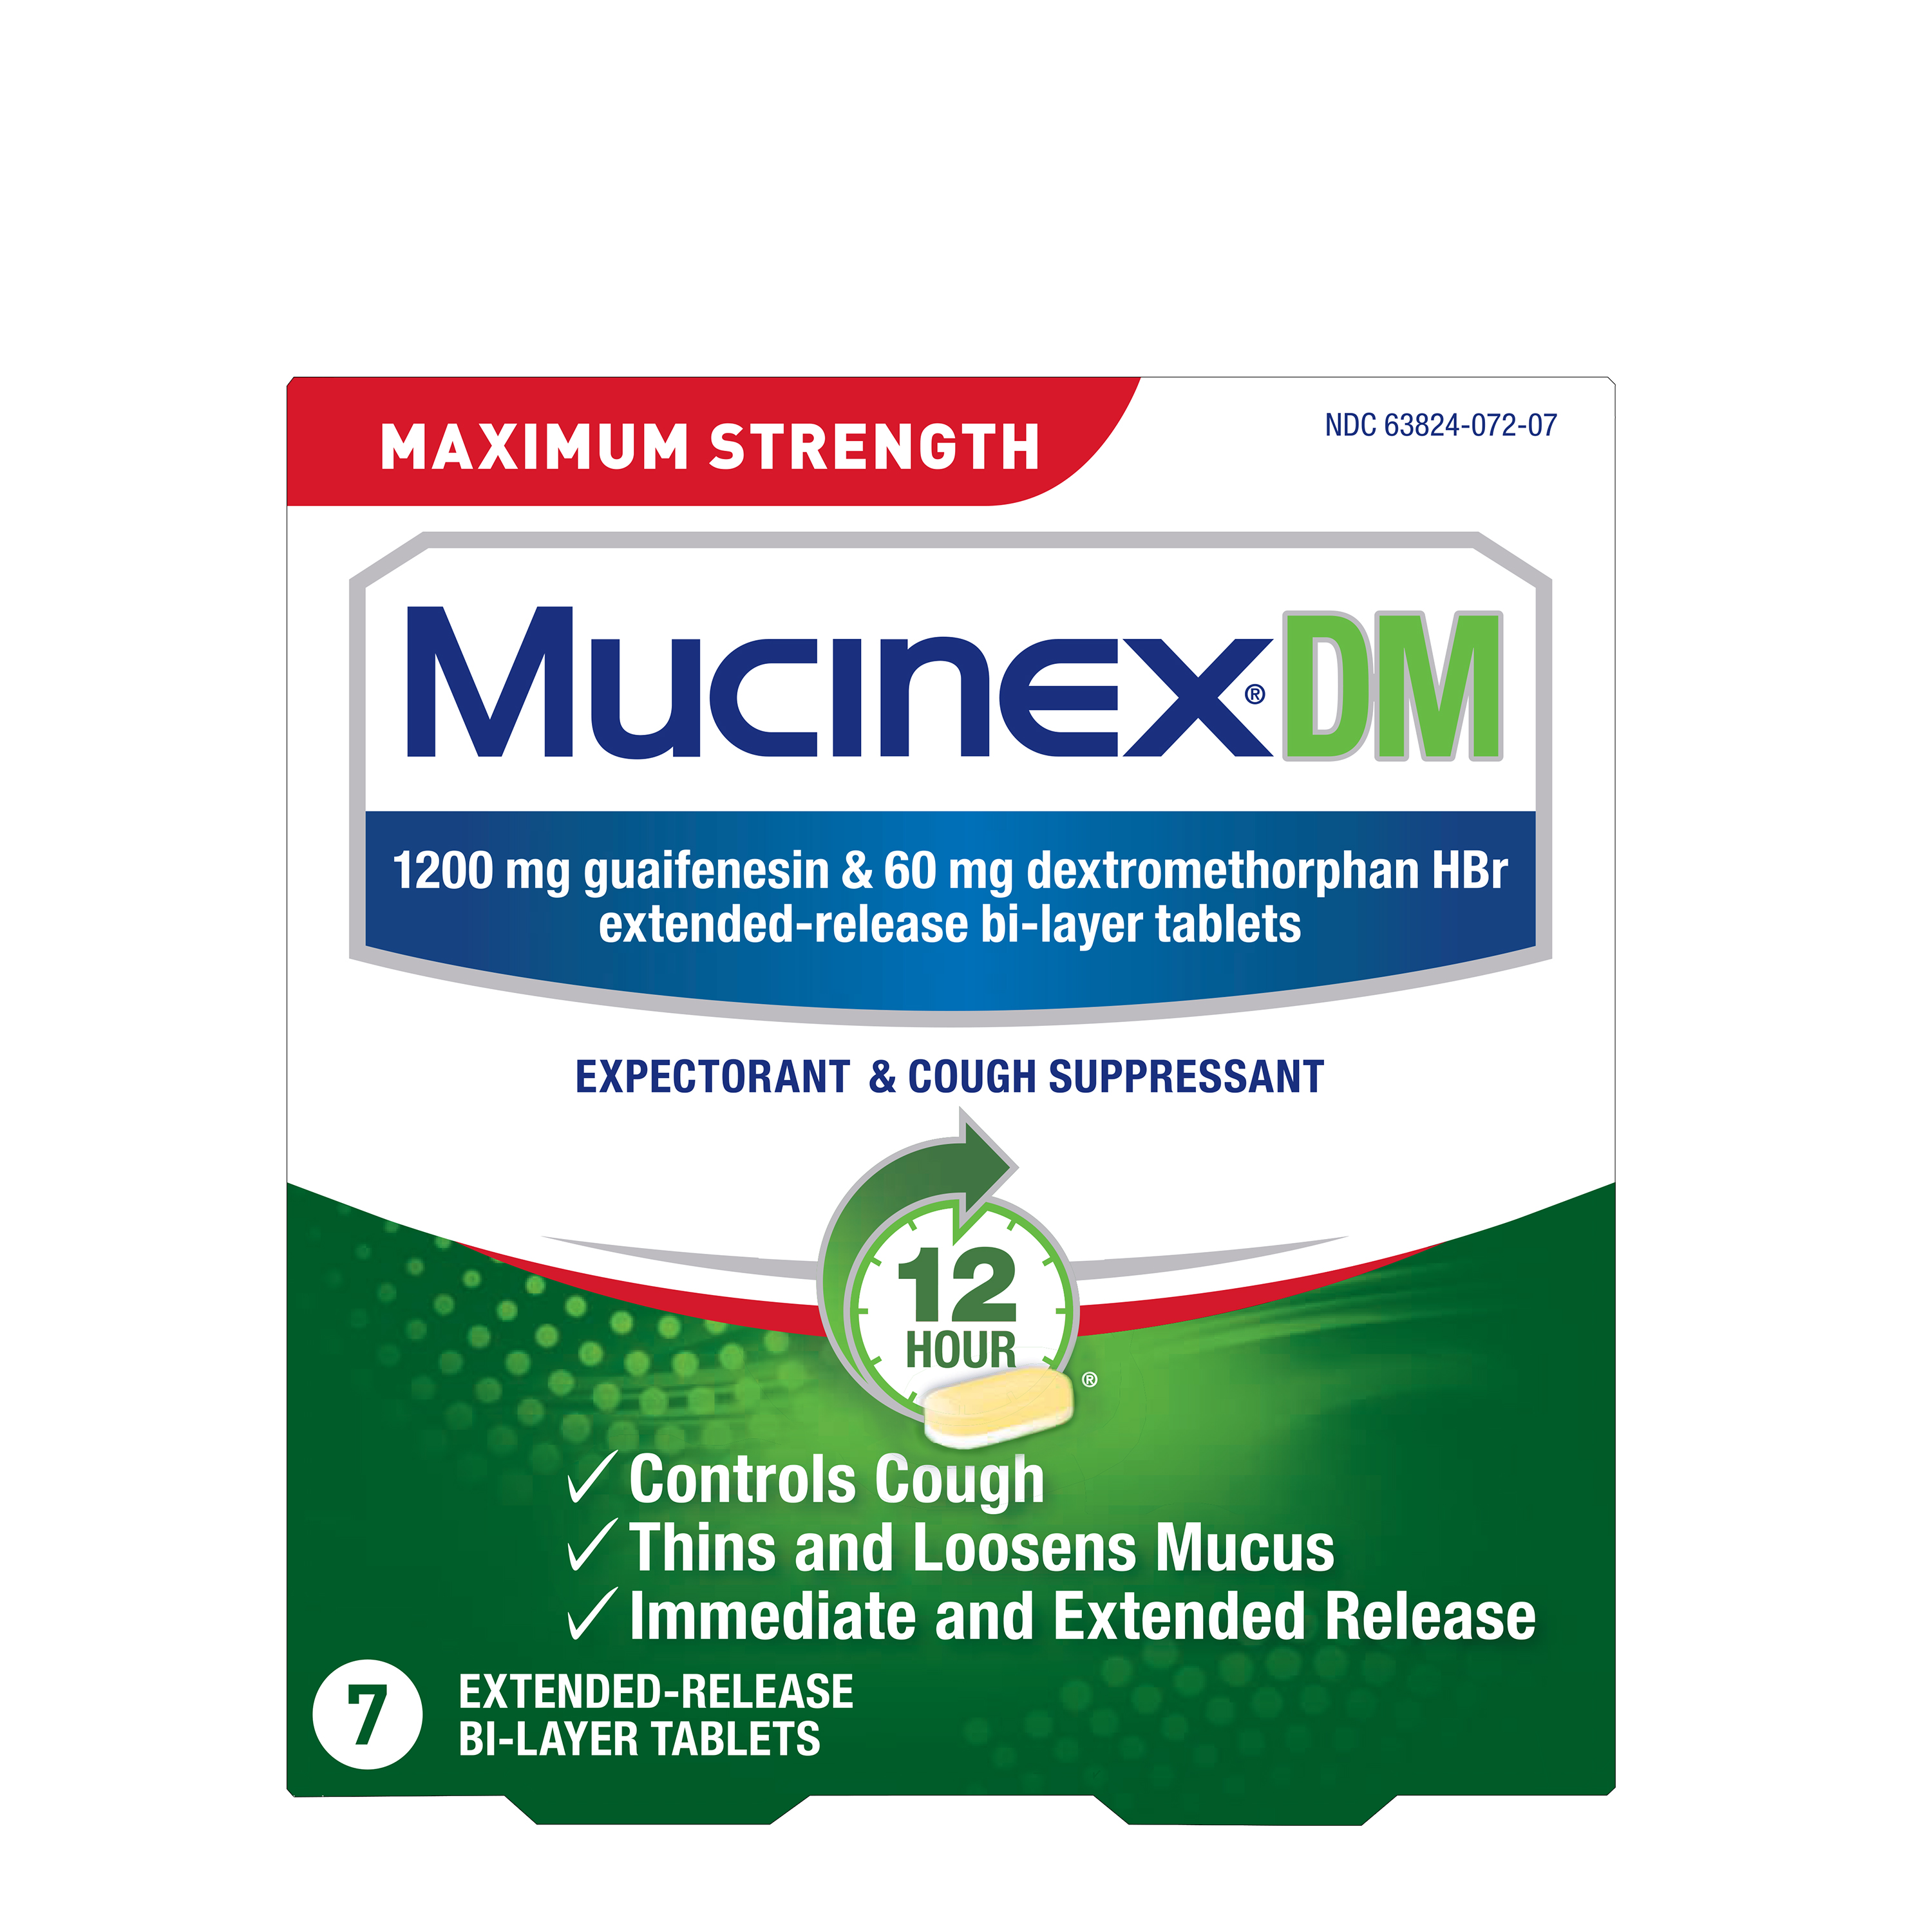 MUCINEX® DM - Max Strength Extended Release Bi-Layer Tablets